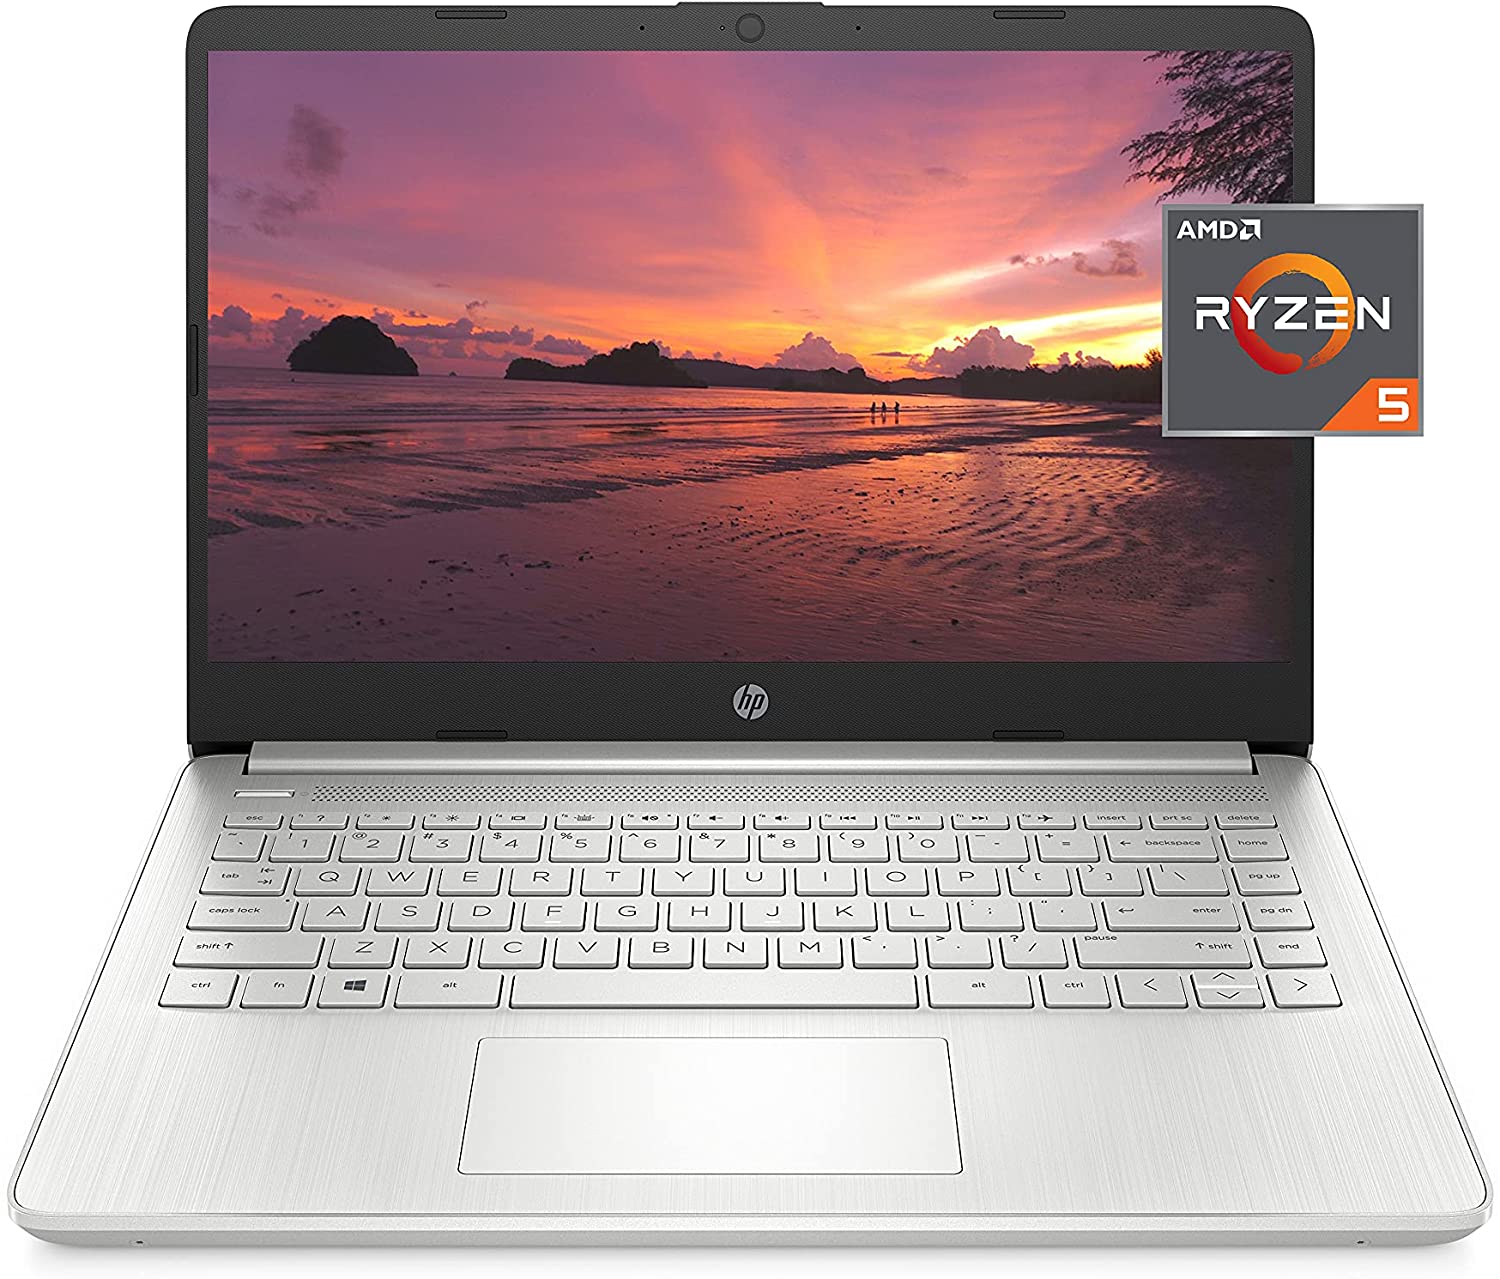 10 Best 14 Inch Laptop Under 500 In 2023 [Buying Guide]